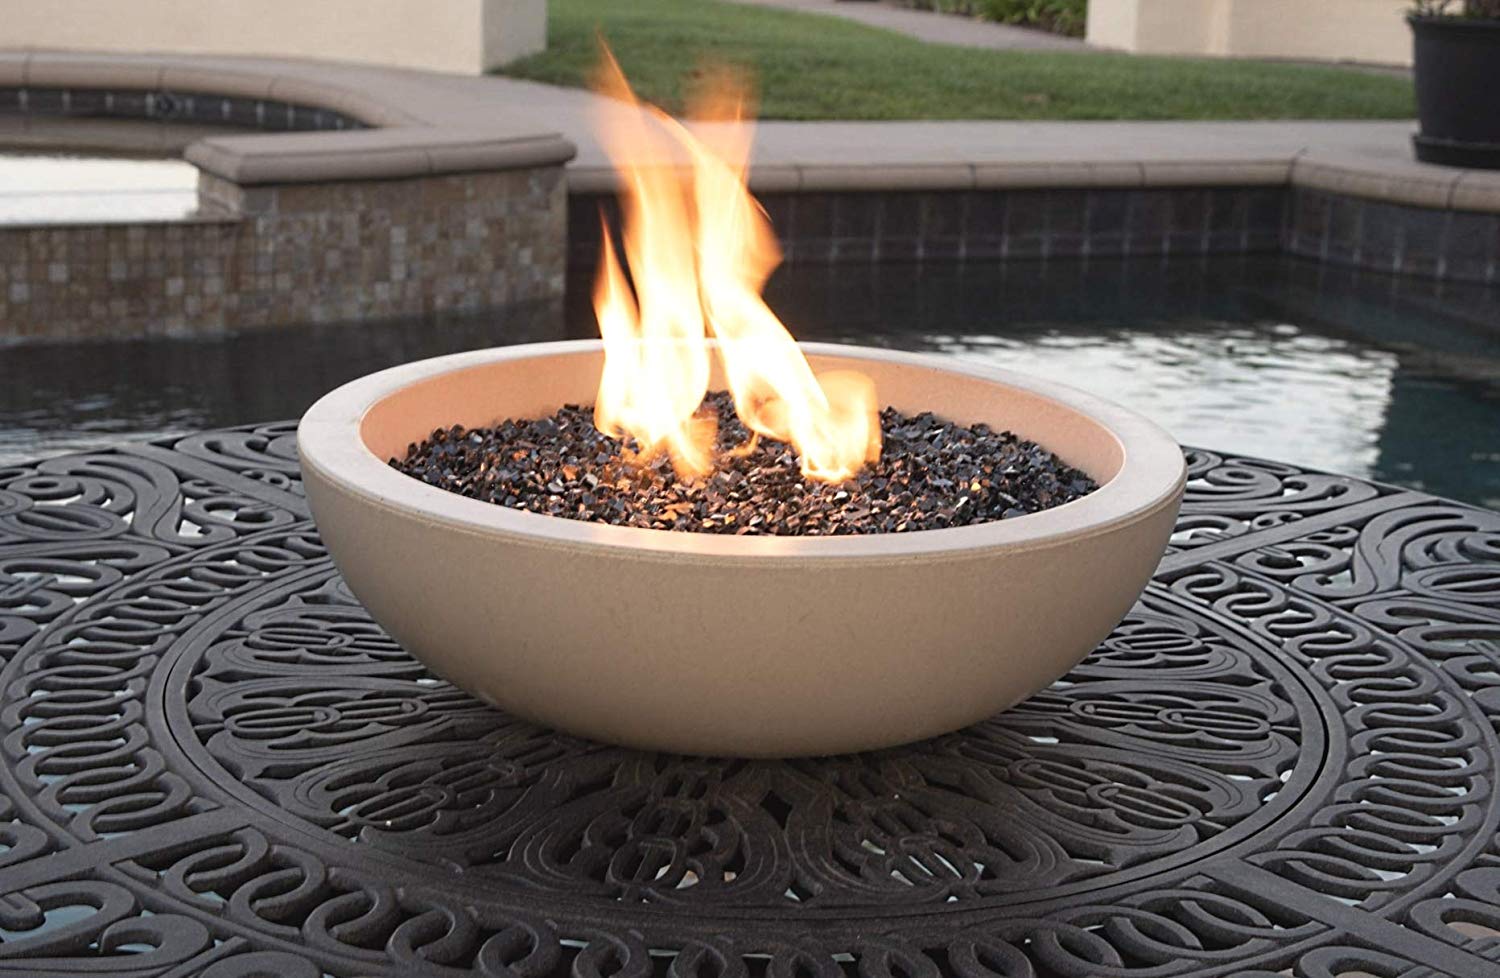 Propane Fireplace Repair Near Me Unique A Fire Pit for Your Patio Table Landscape Quality Tabletop Fire Bowl Made Of Concrete with 50 000 Btu Stainless Steel Burner Runs On Propane